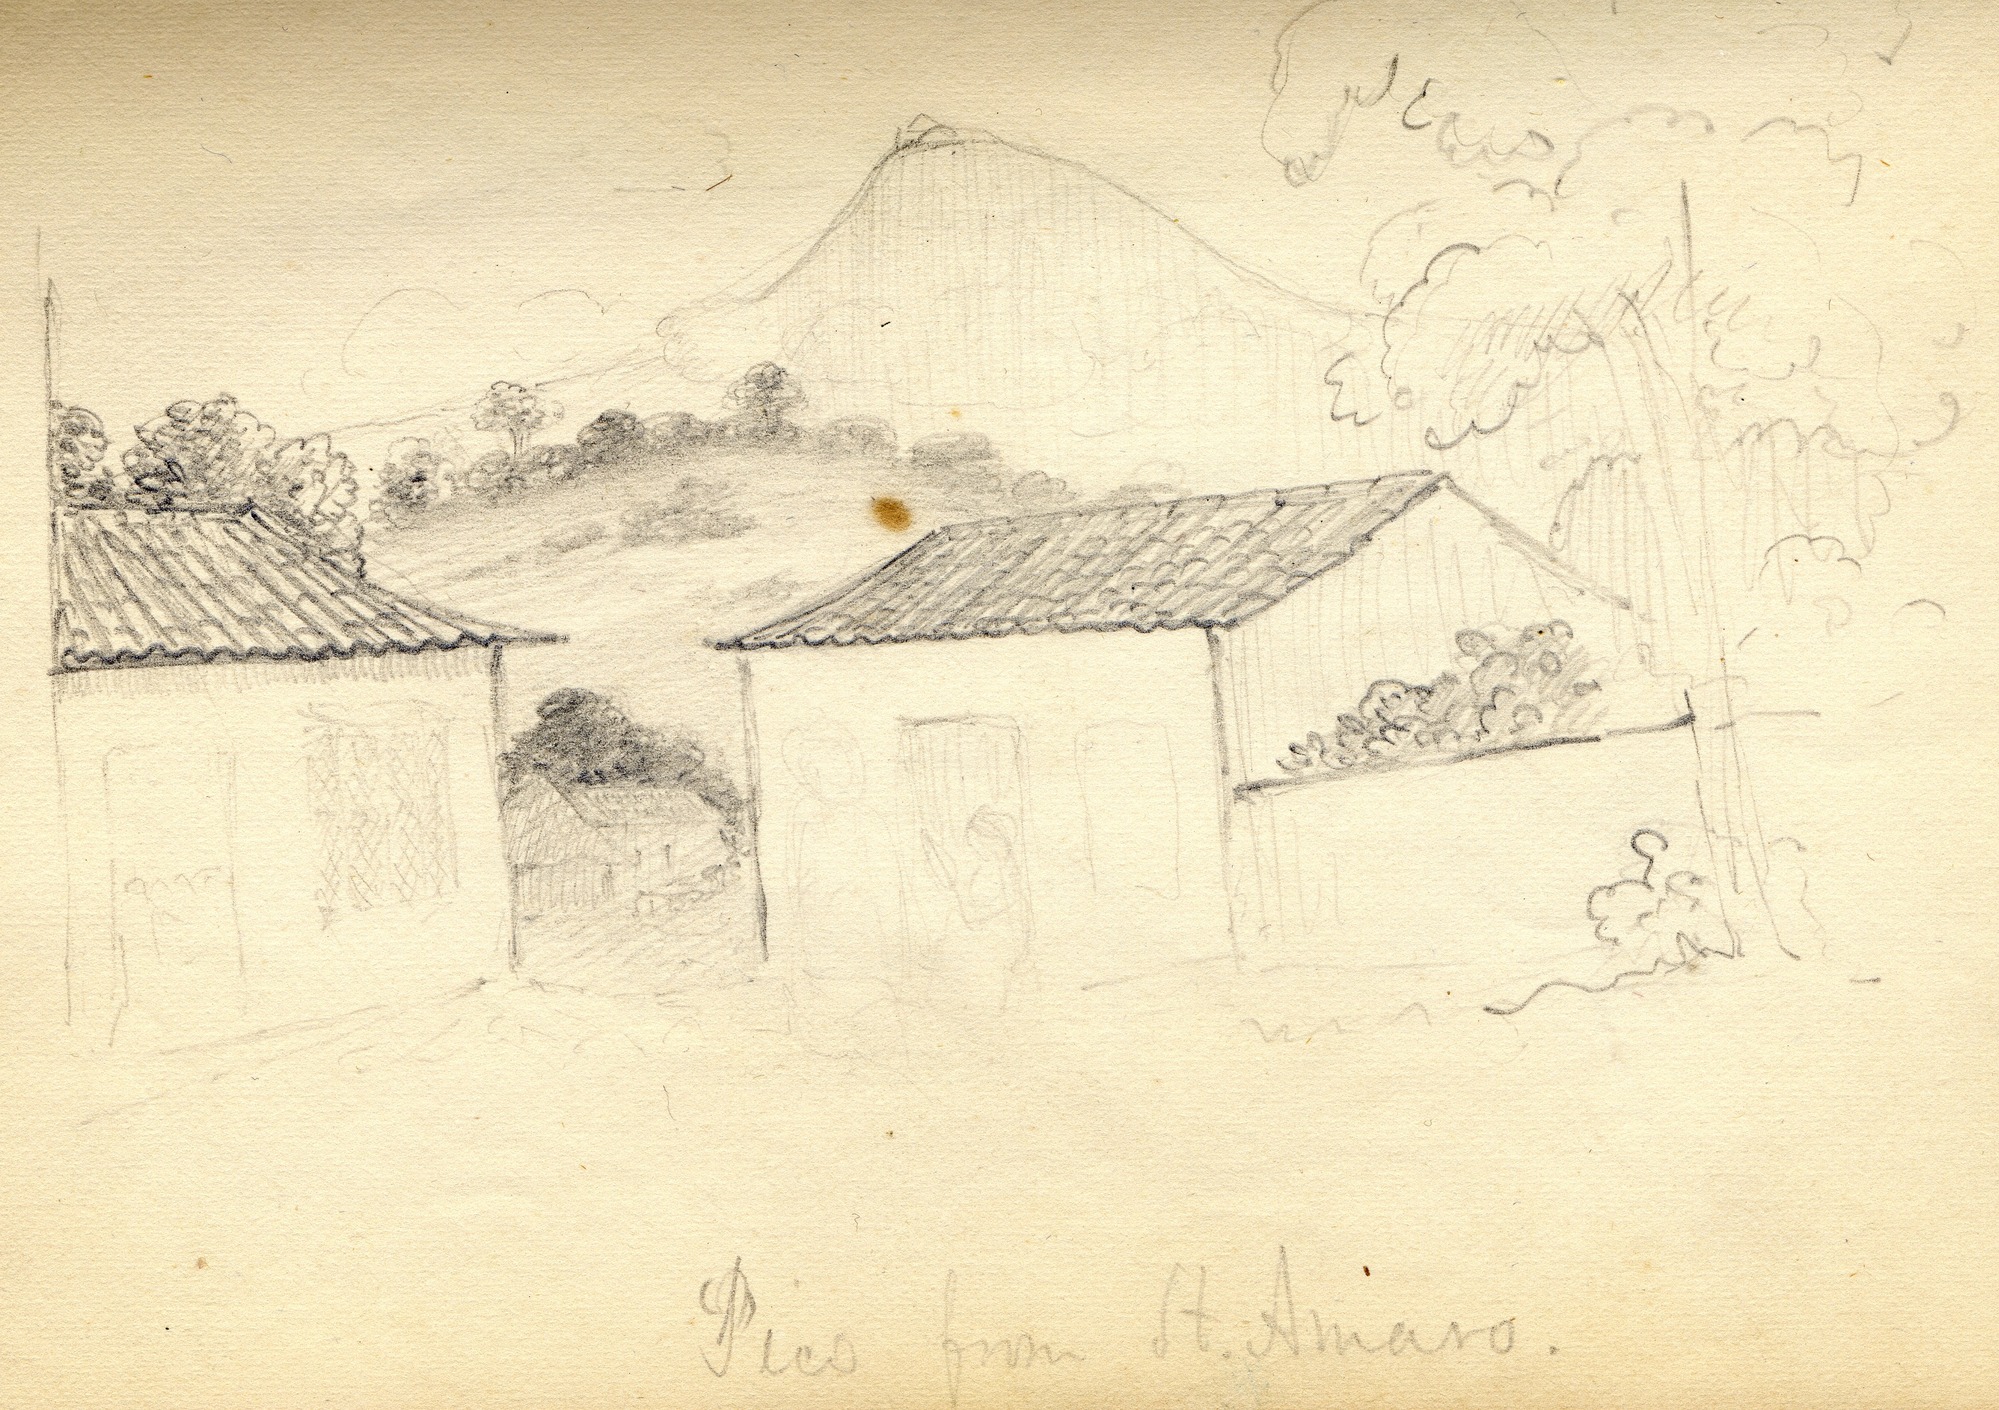 Pencil sketch with steep mountain in background, buildings with tile roofs in foreground